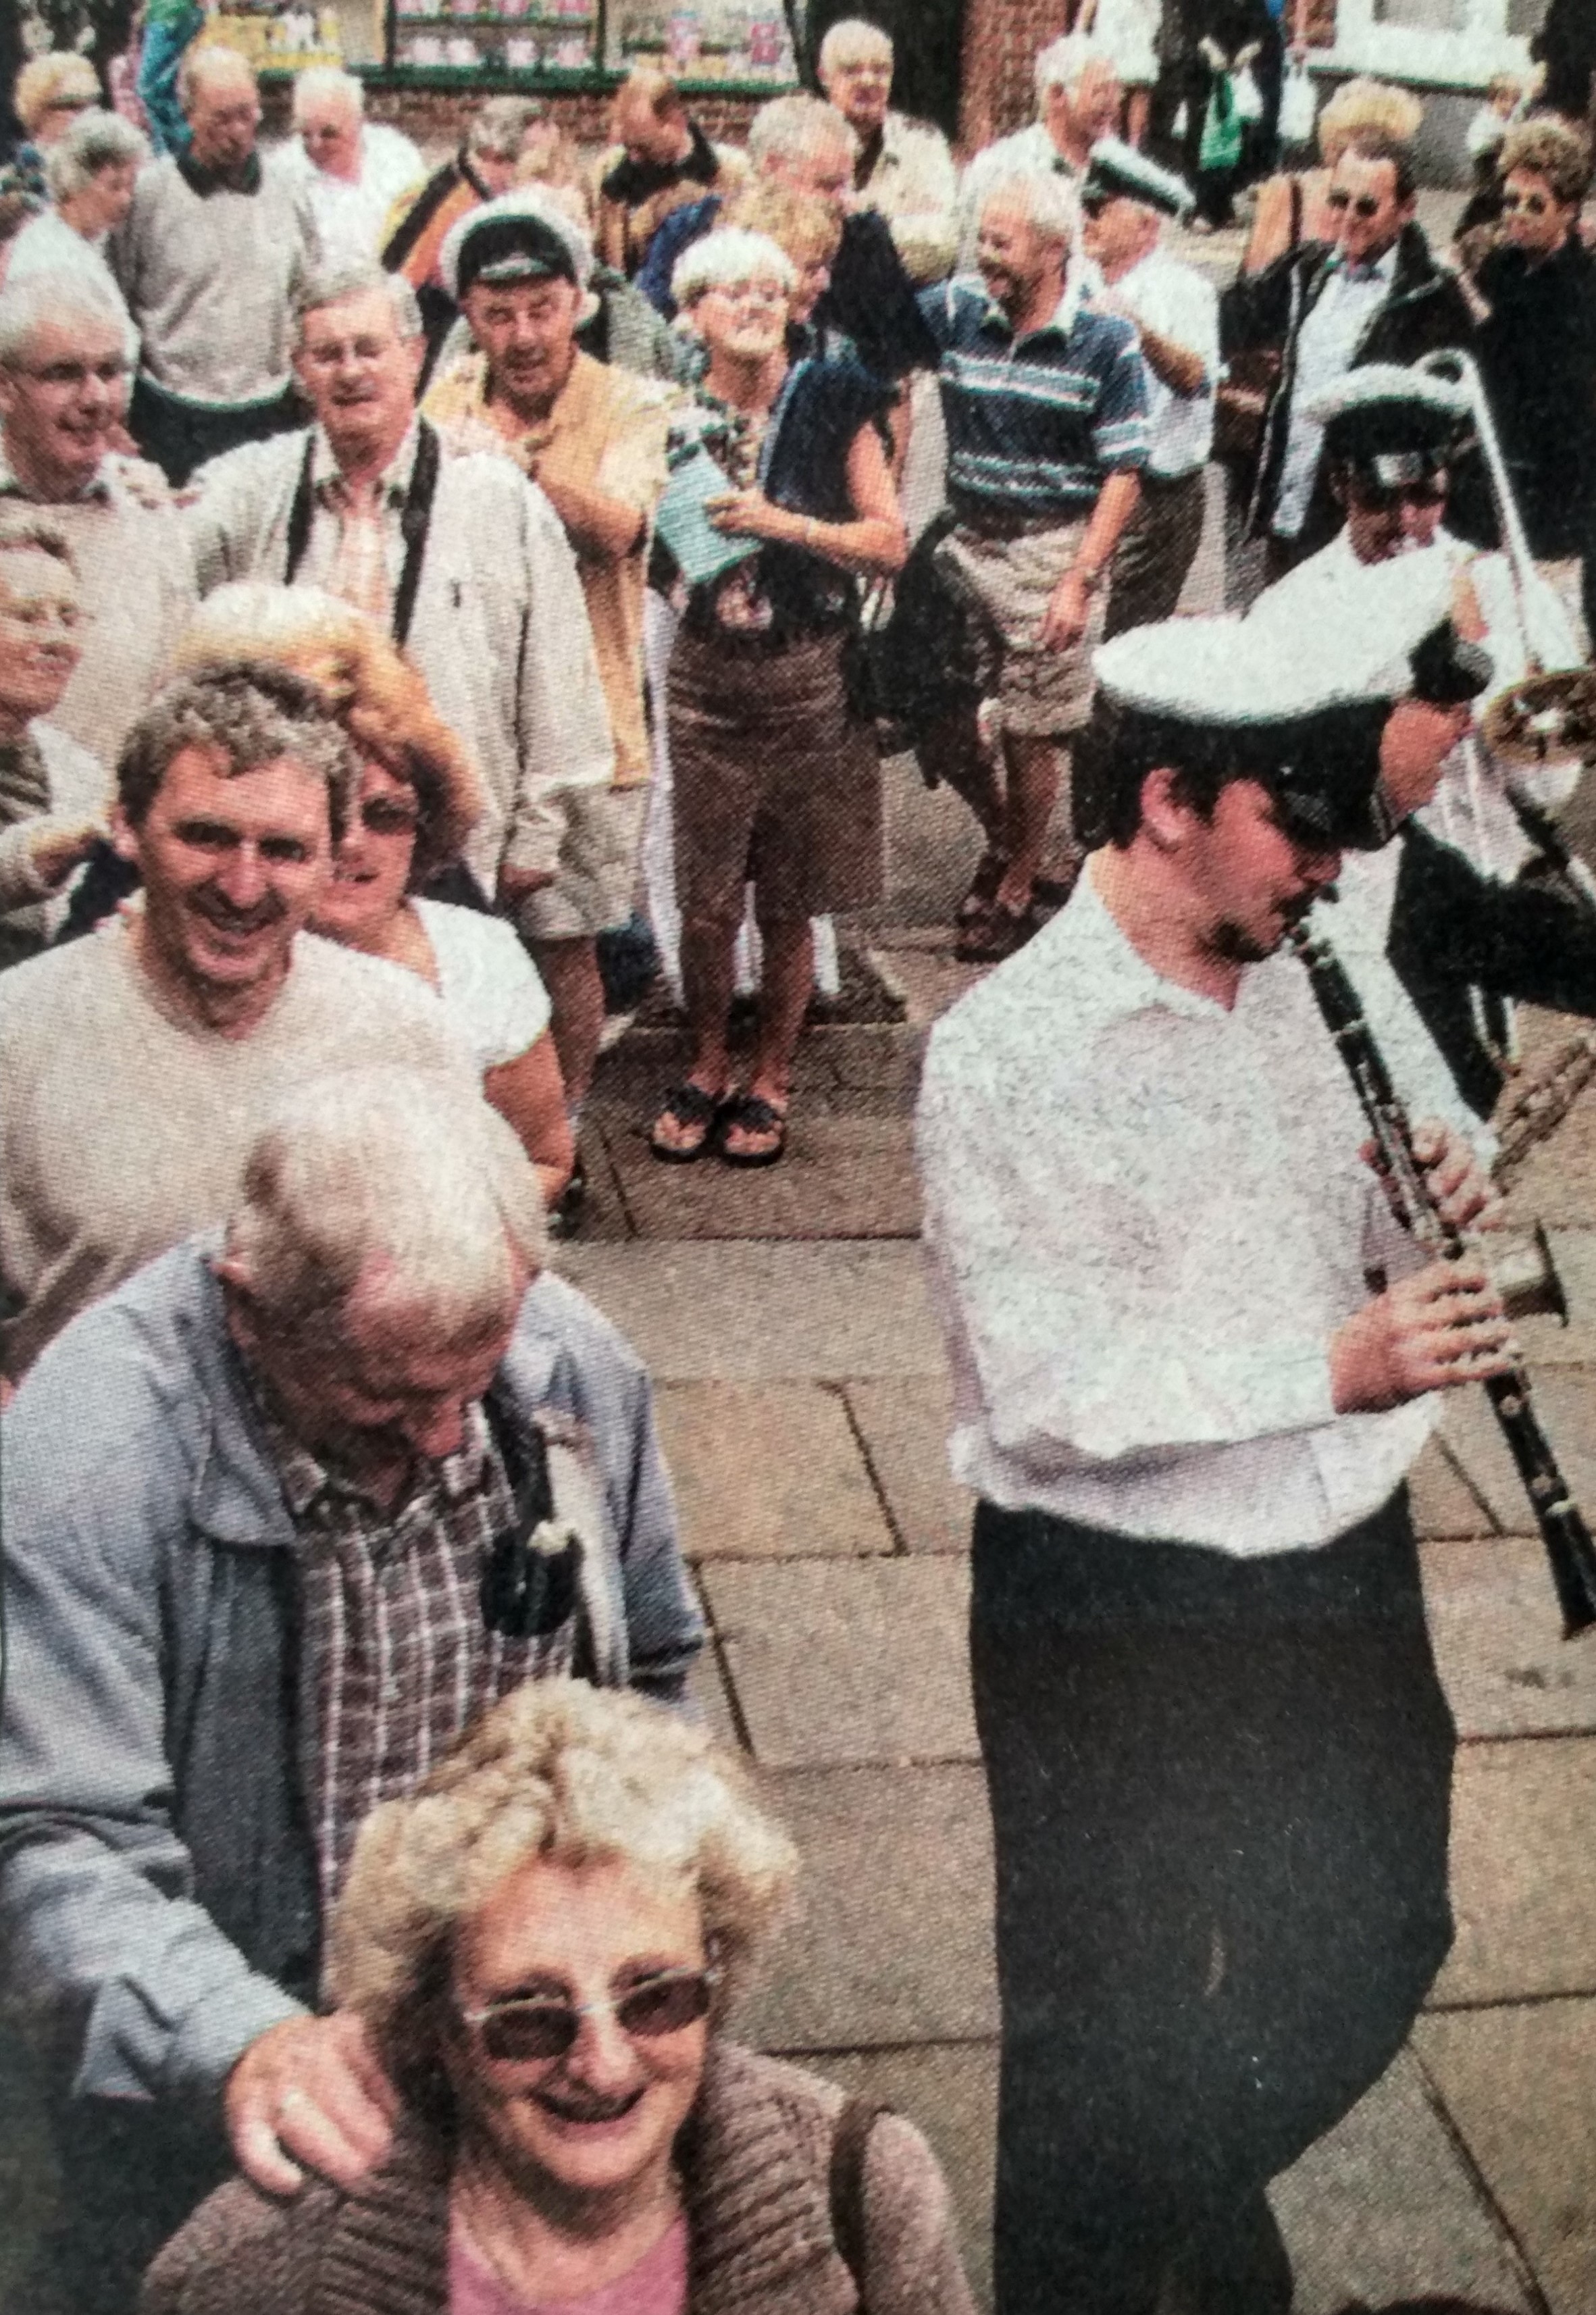 September 2005 and an impromptu conga formed in Pershore during the annual jazz festival